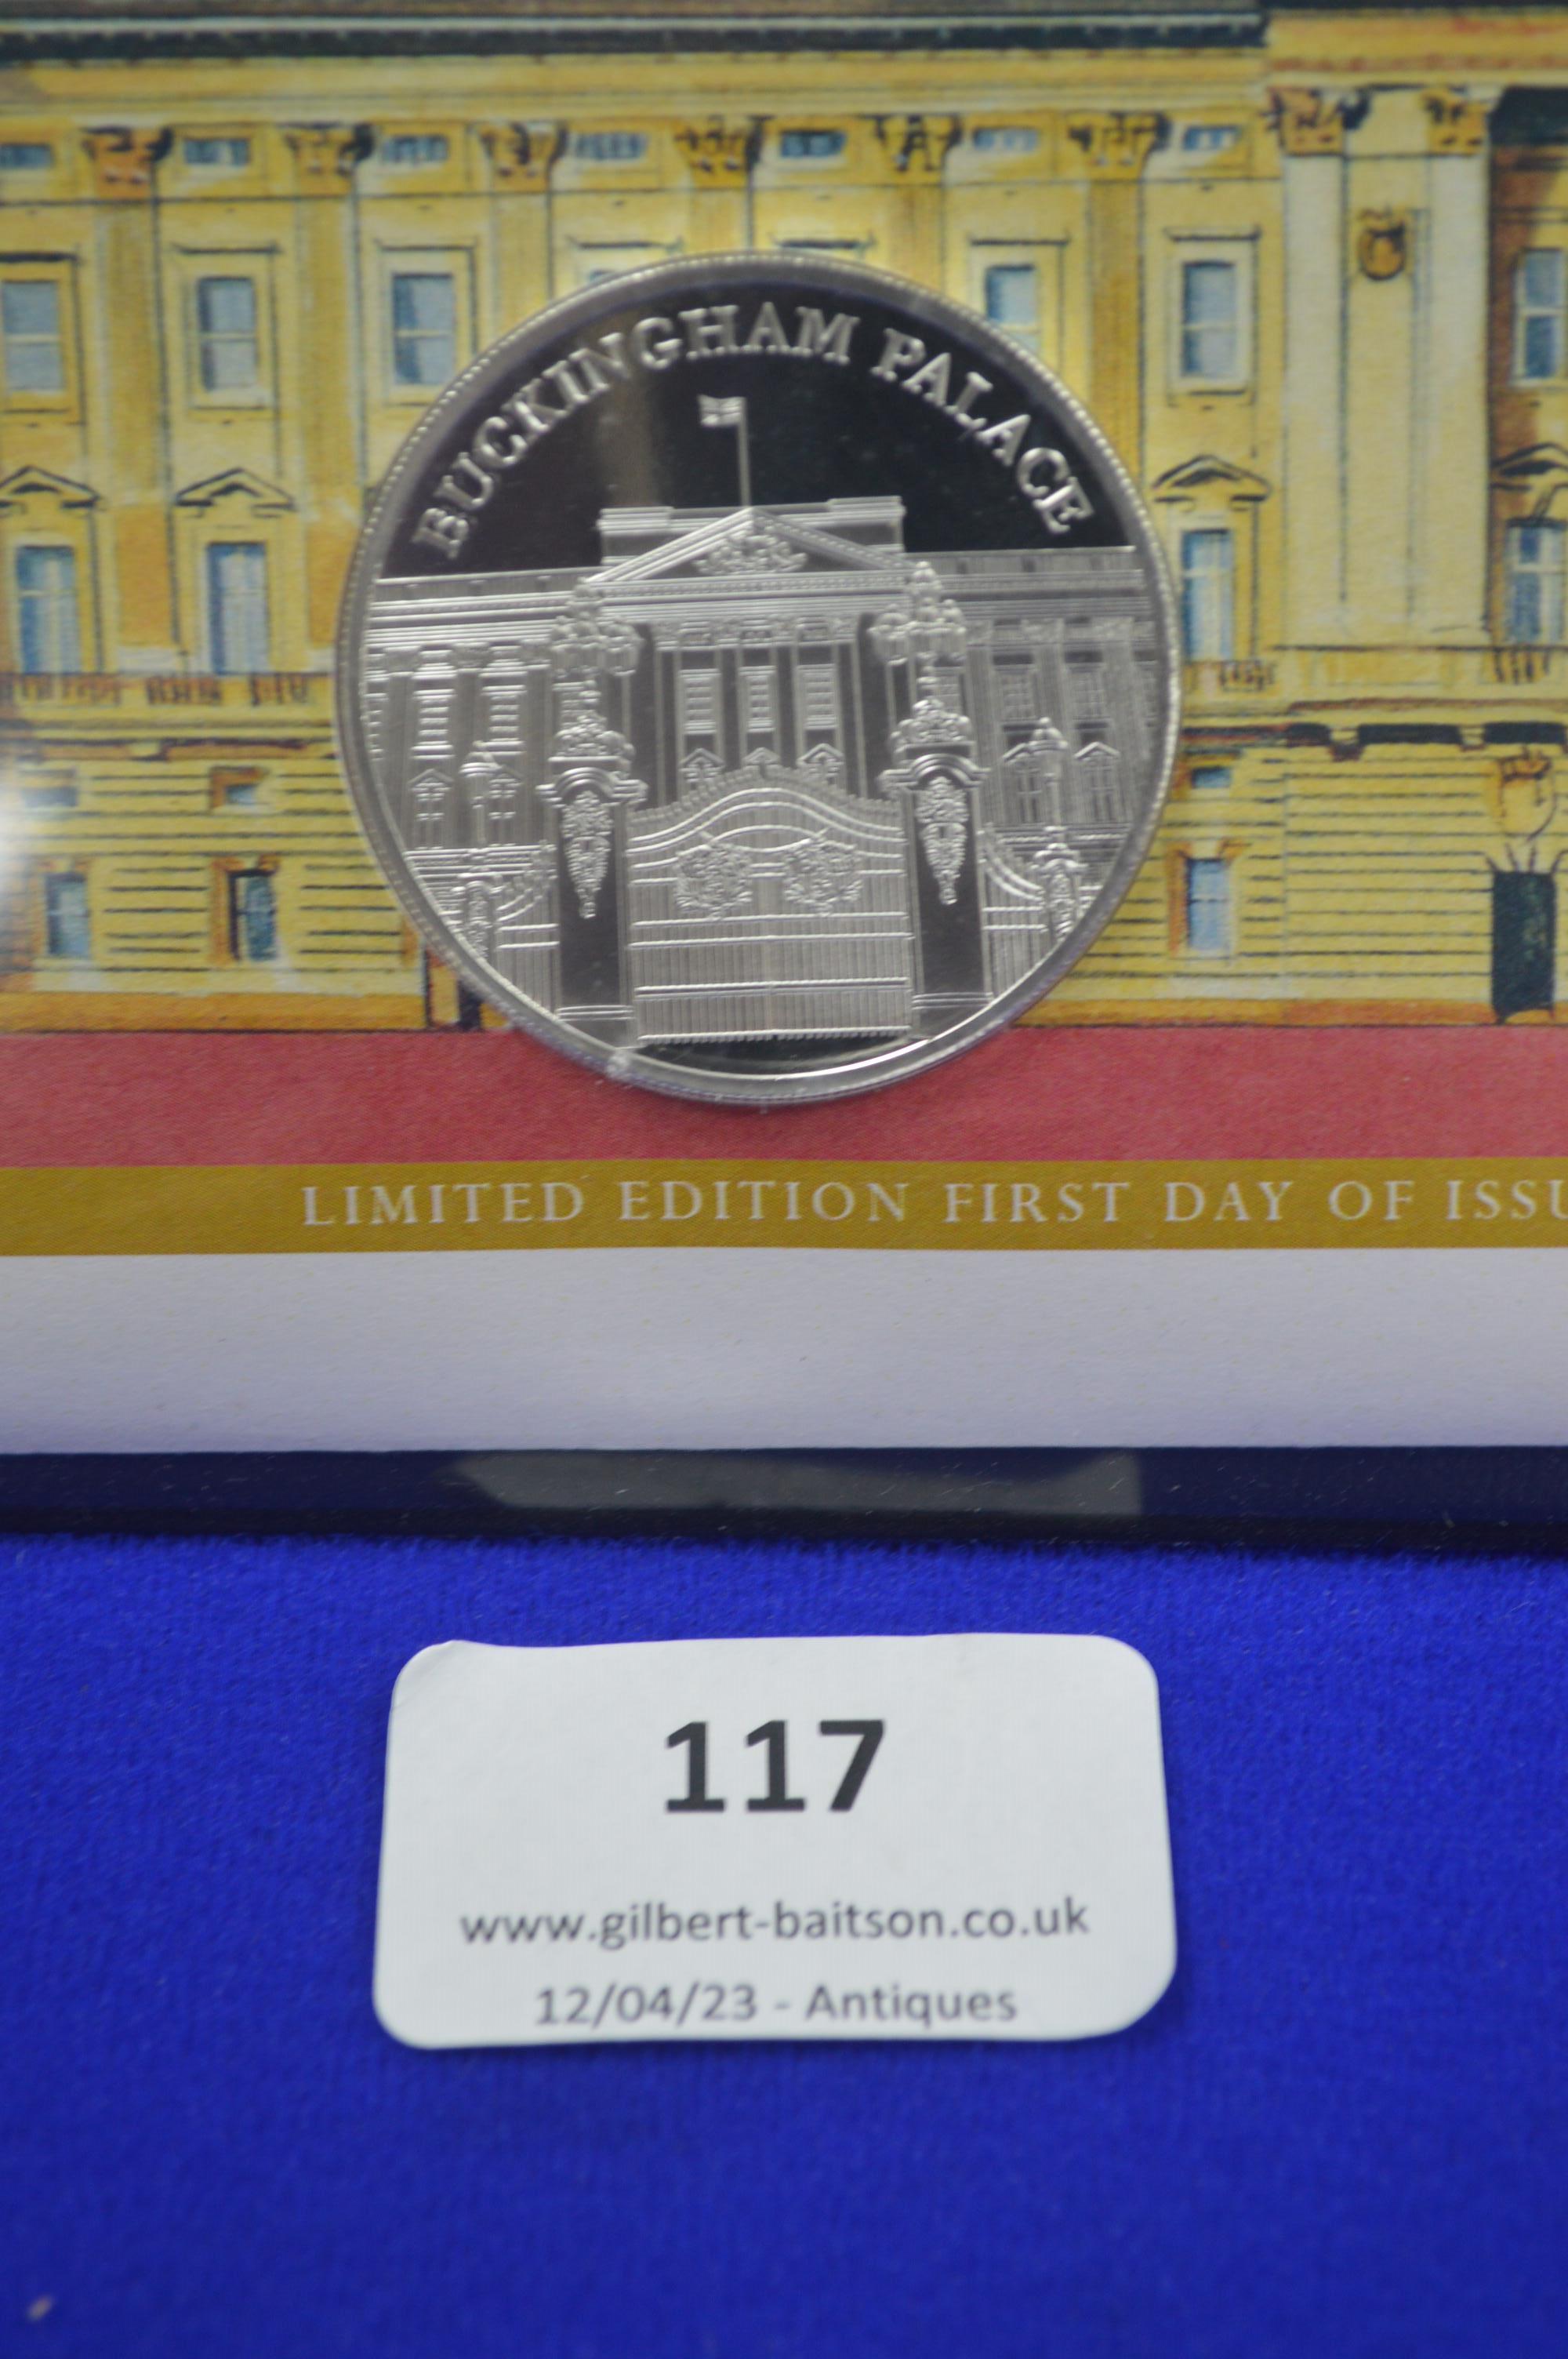 Westminster Buckingham Palace 2014 Silver First Day Commemorative Cover - Image 2 of 2